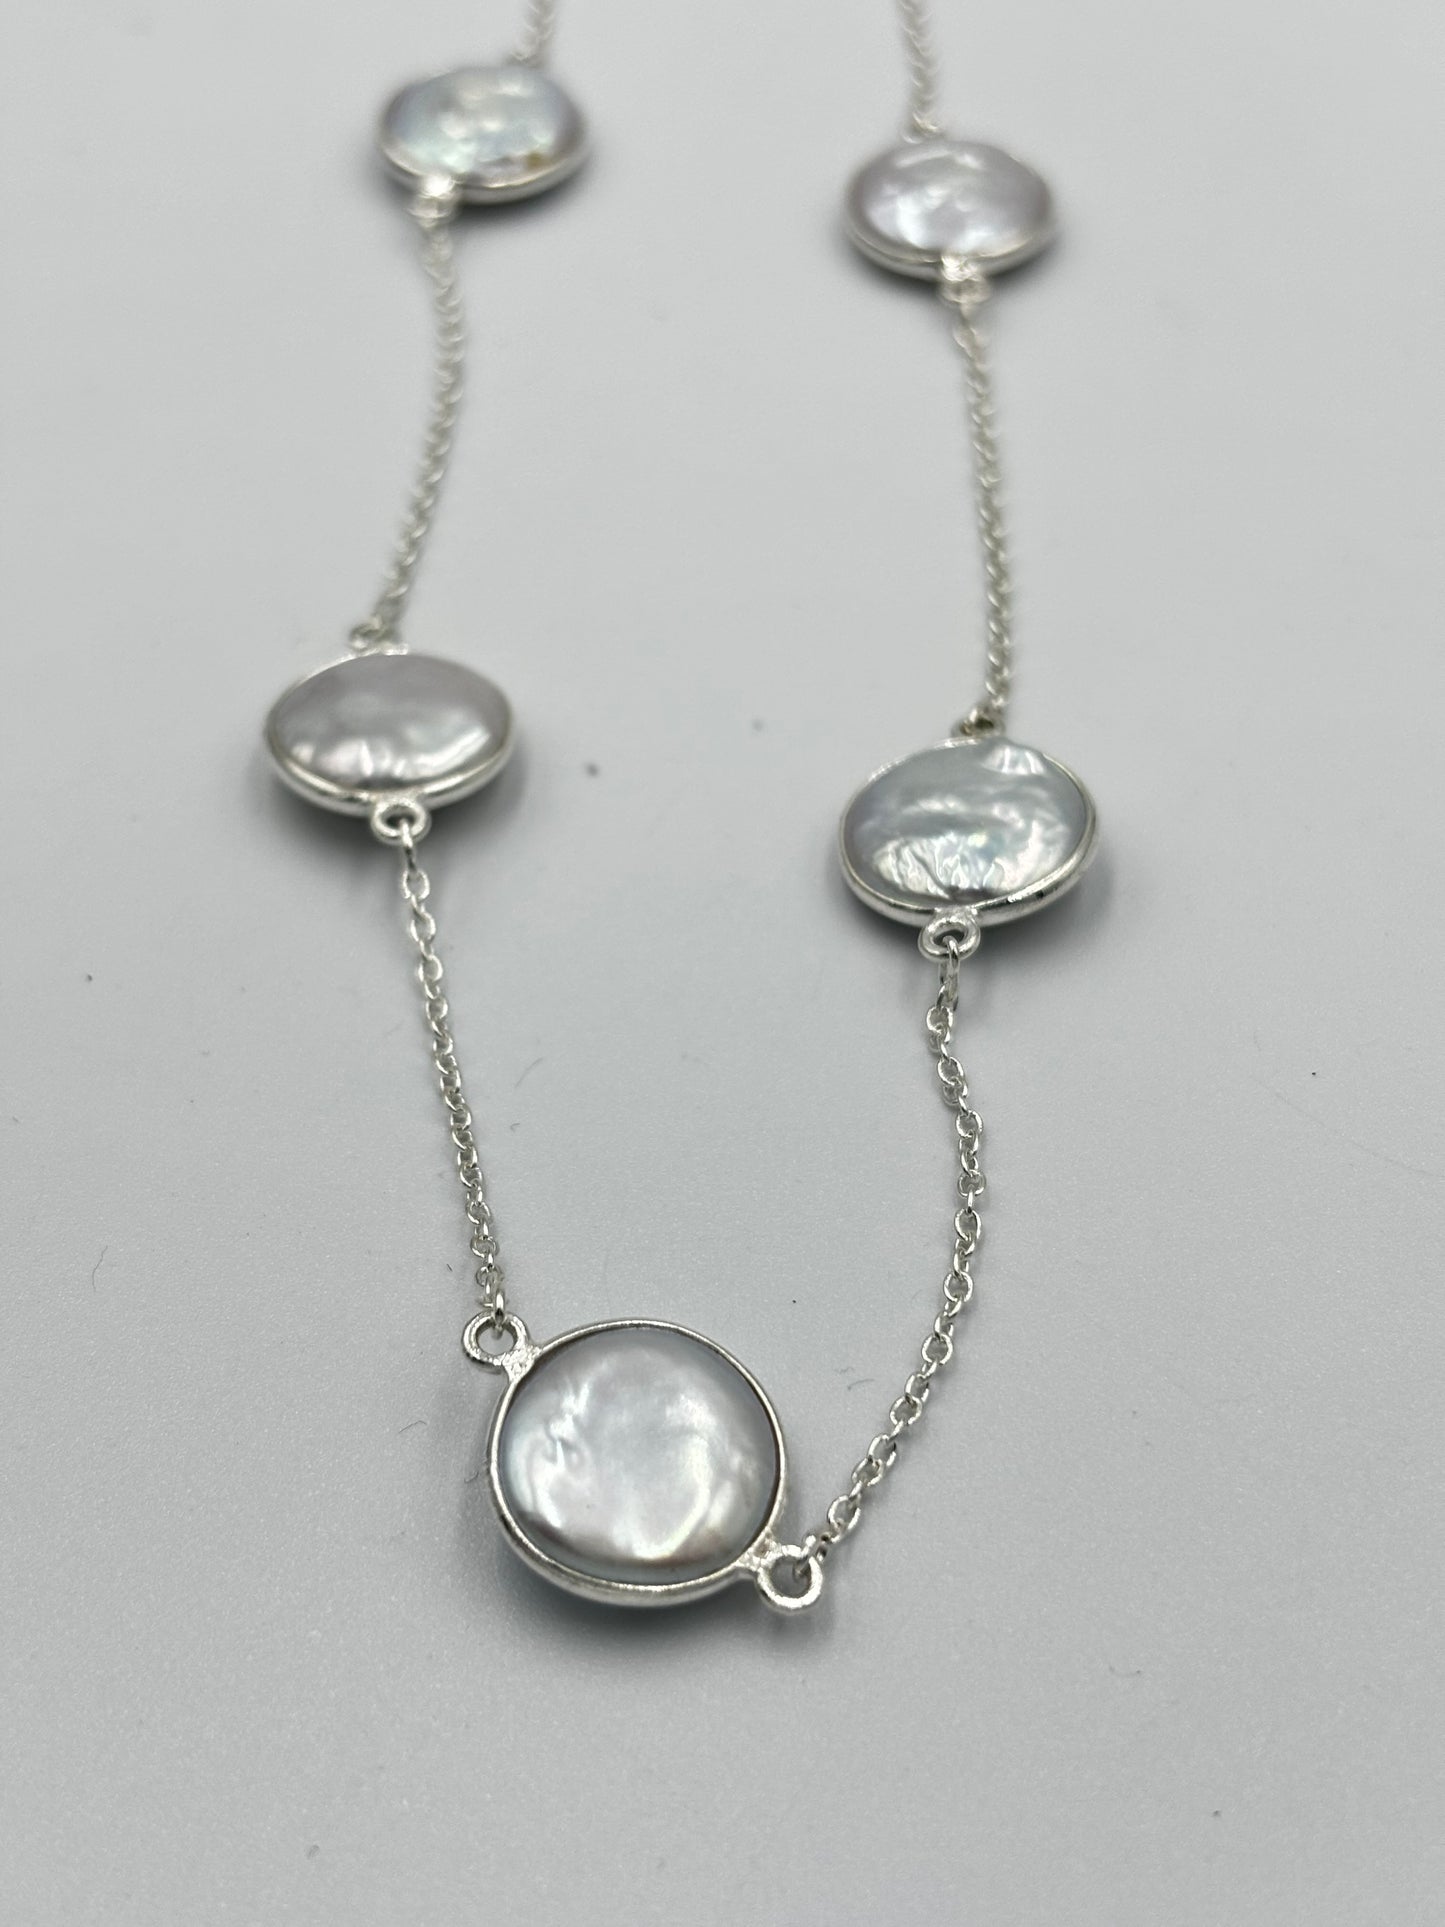 90cm necklace with 15 stunning coin pearls